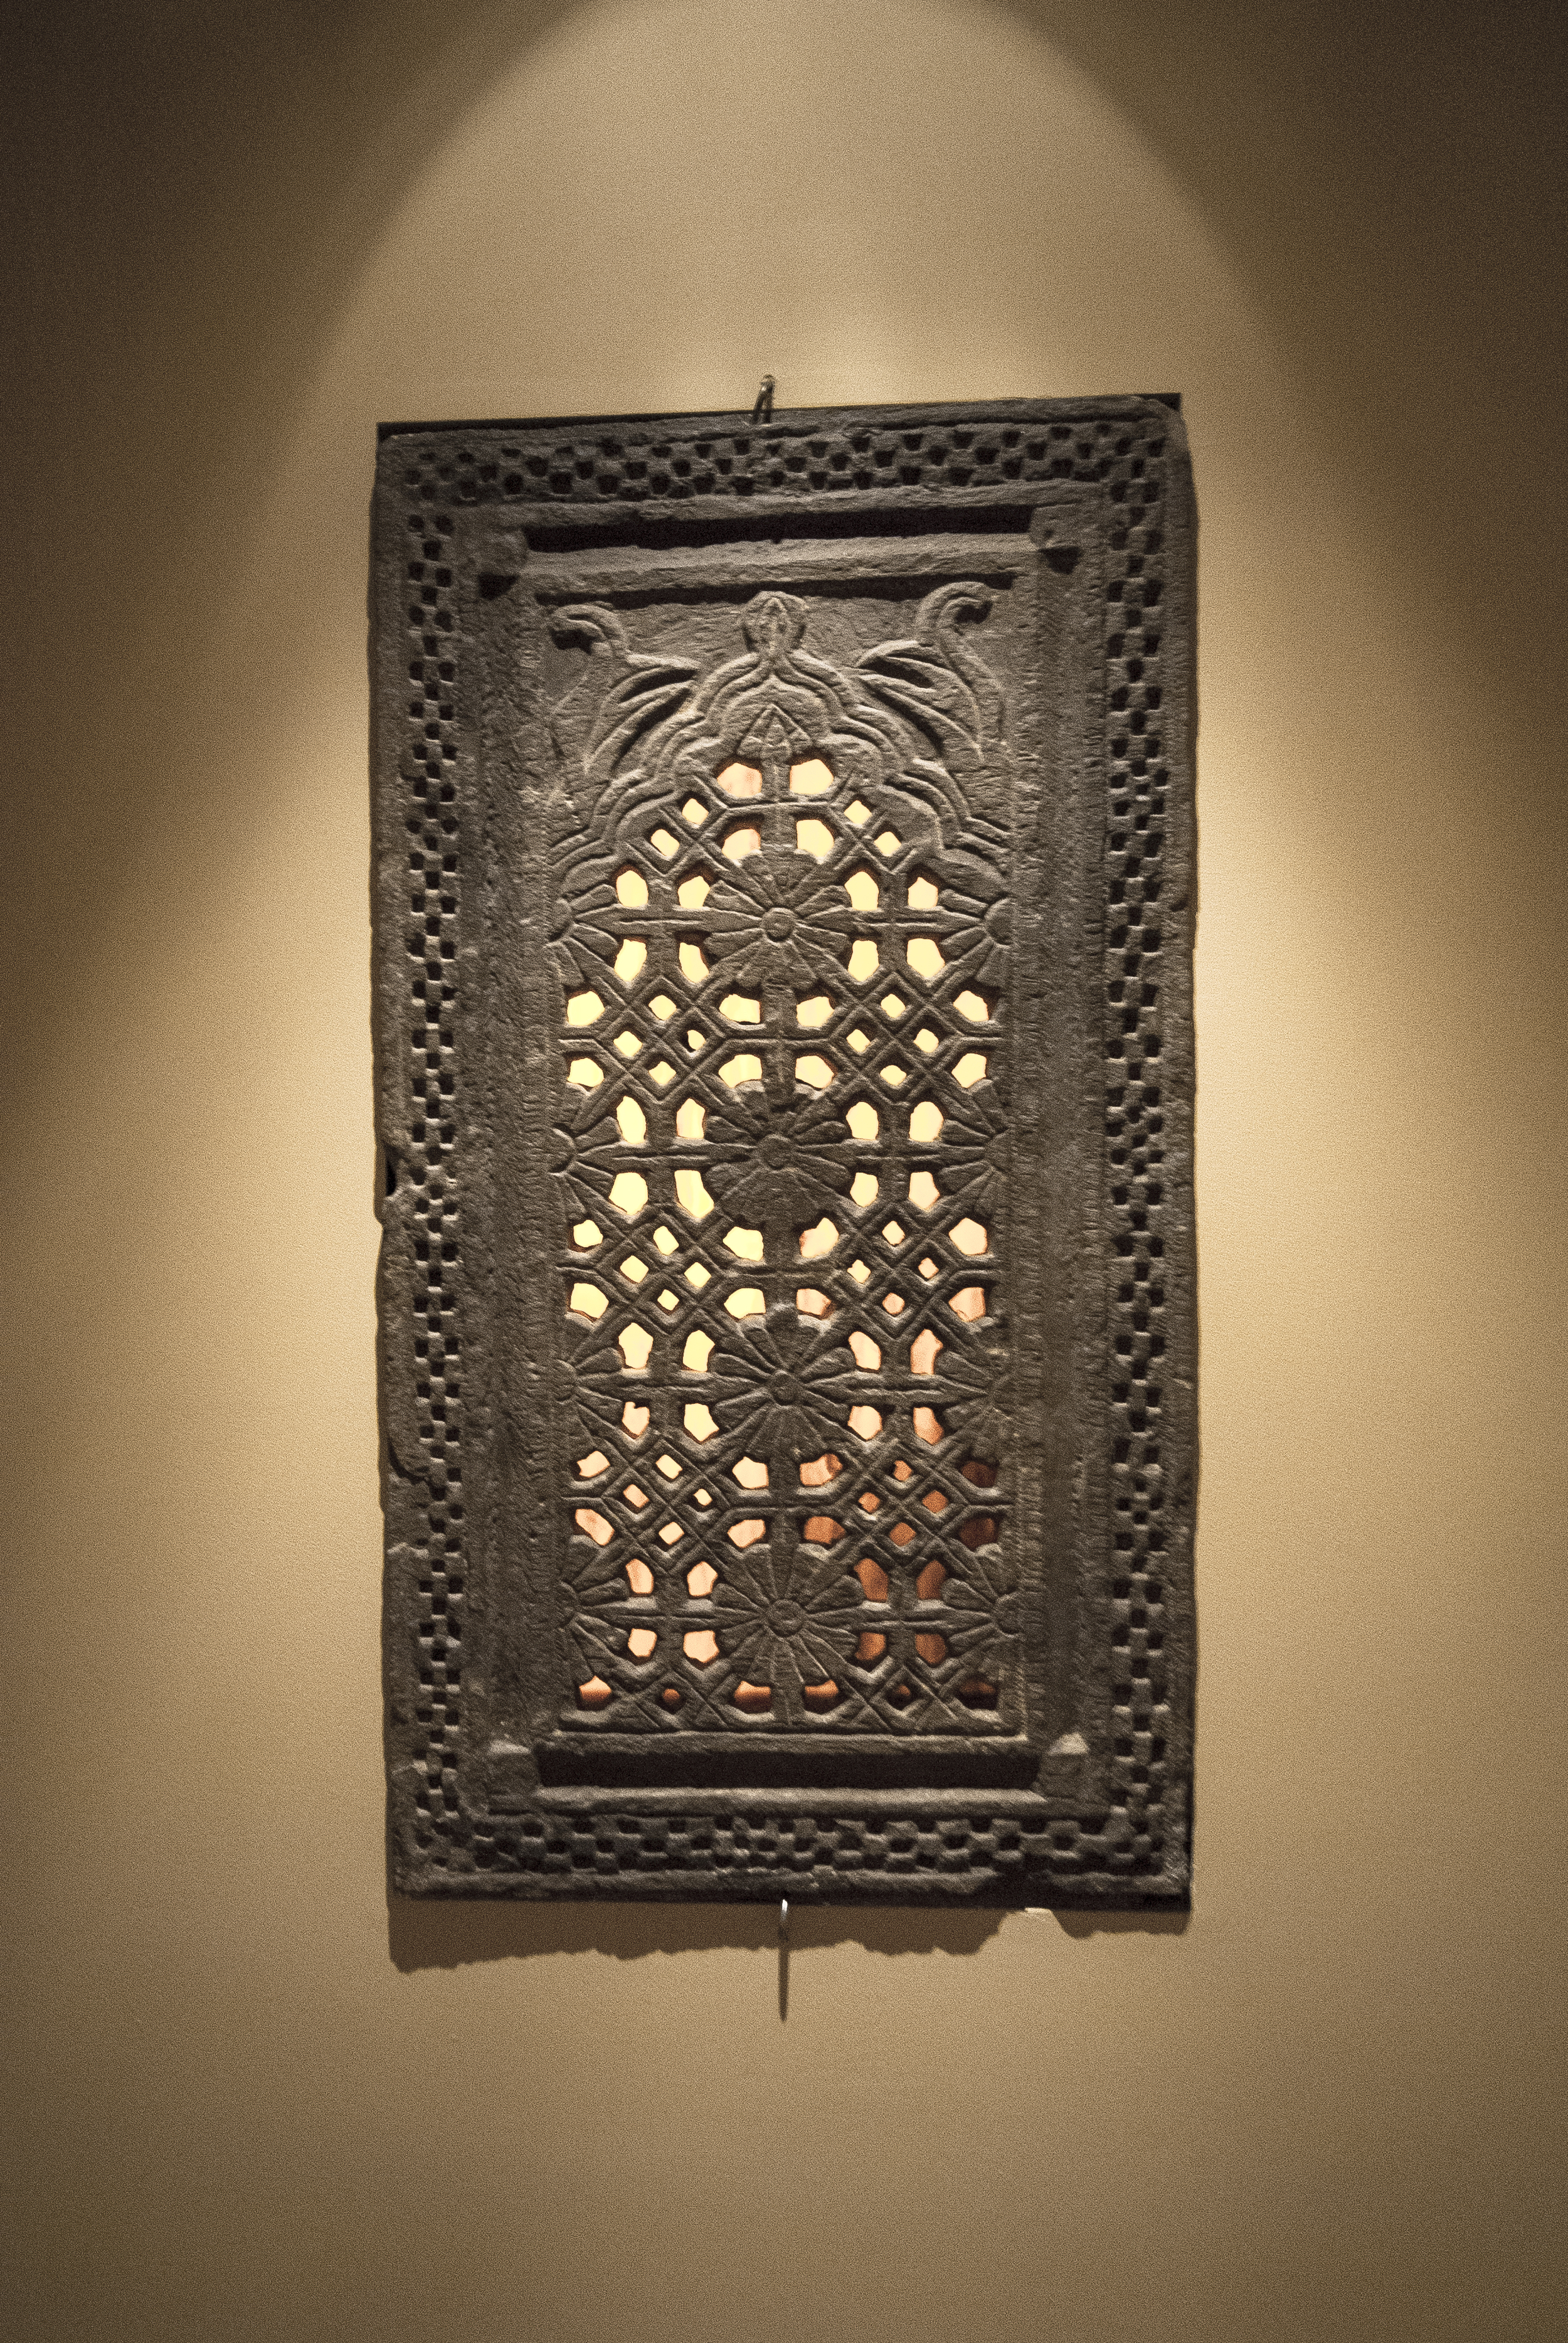 The "temple window nook" houses an 800 year old window from a Hindu temple.  The window is recessed into the wall and back lit by a Lexan plastic panel.